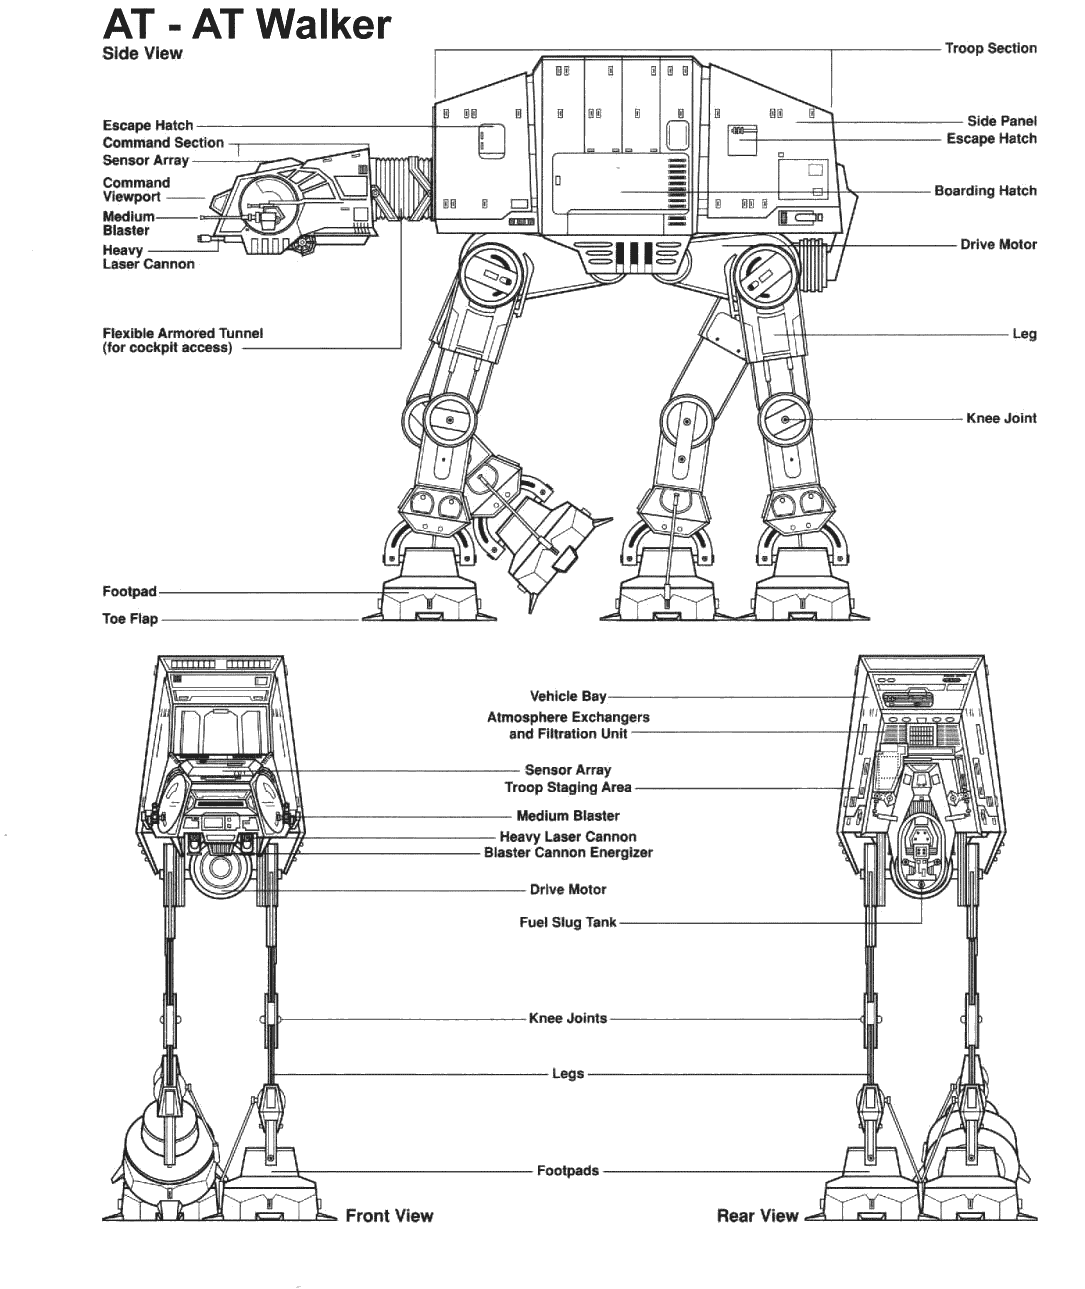 AT-AT Schematic